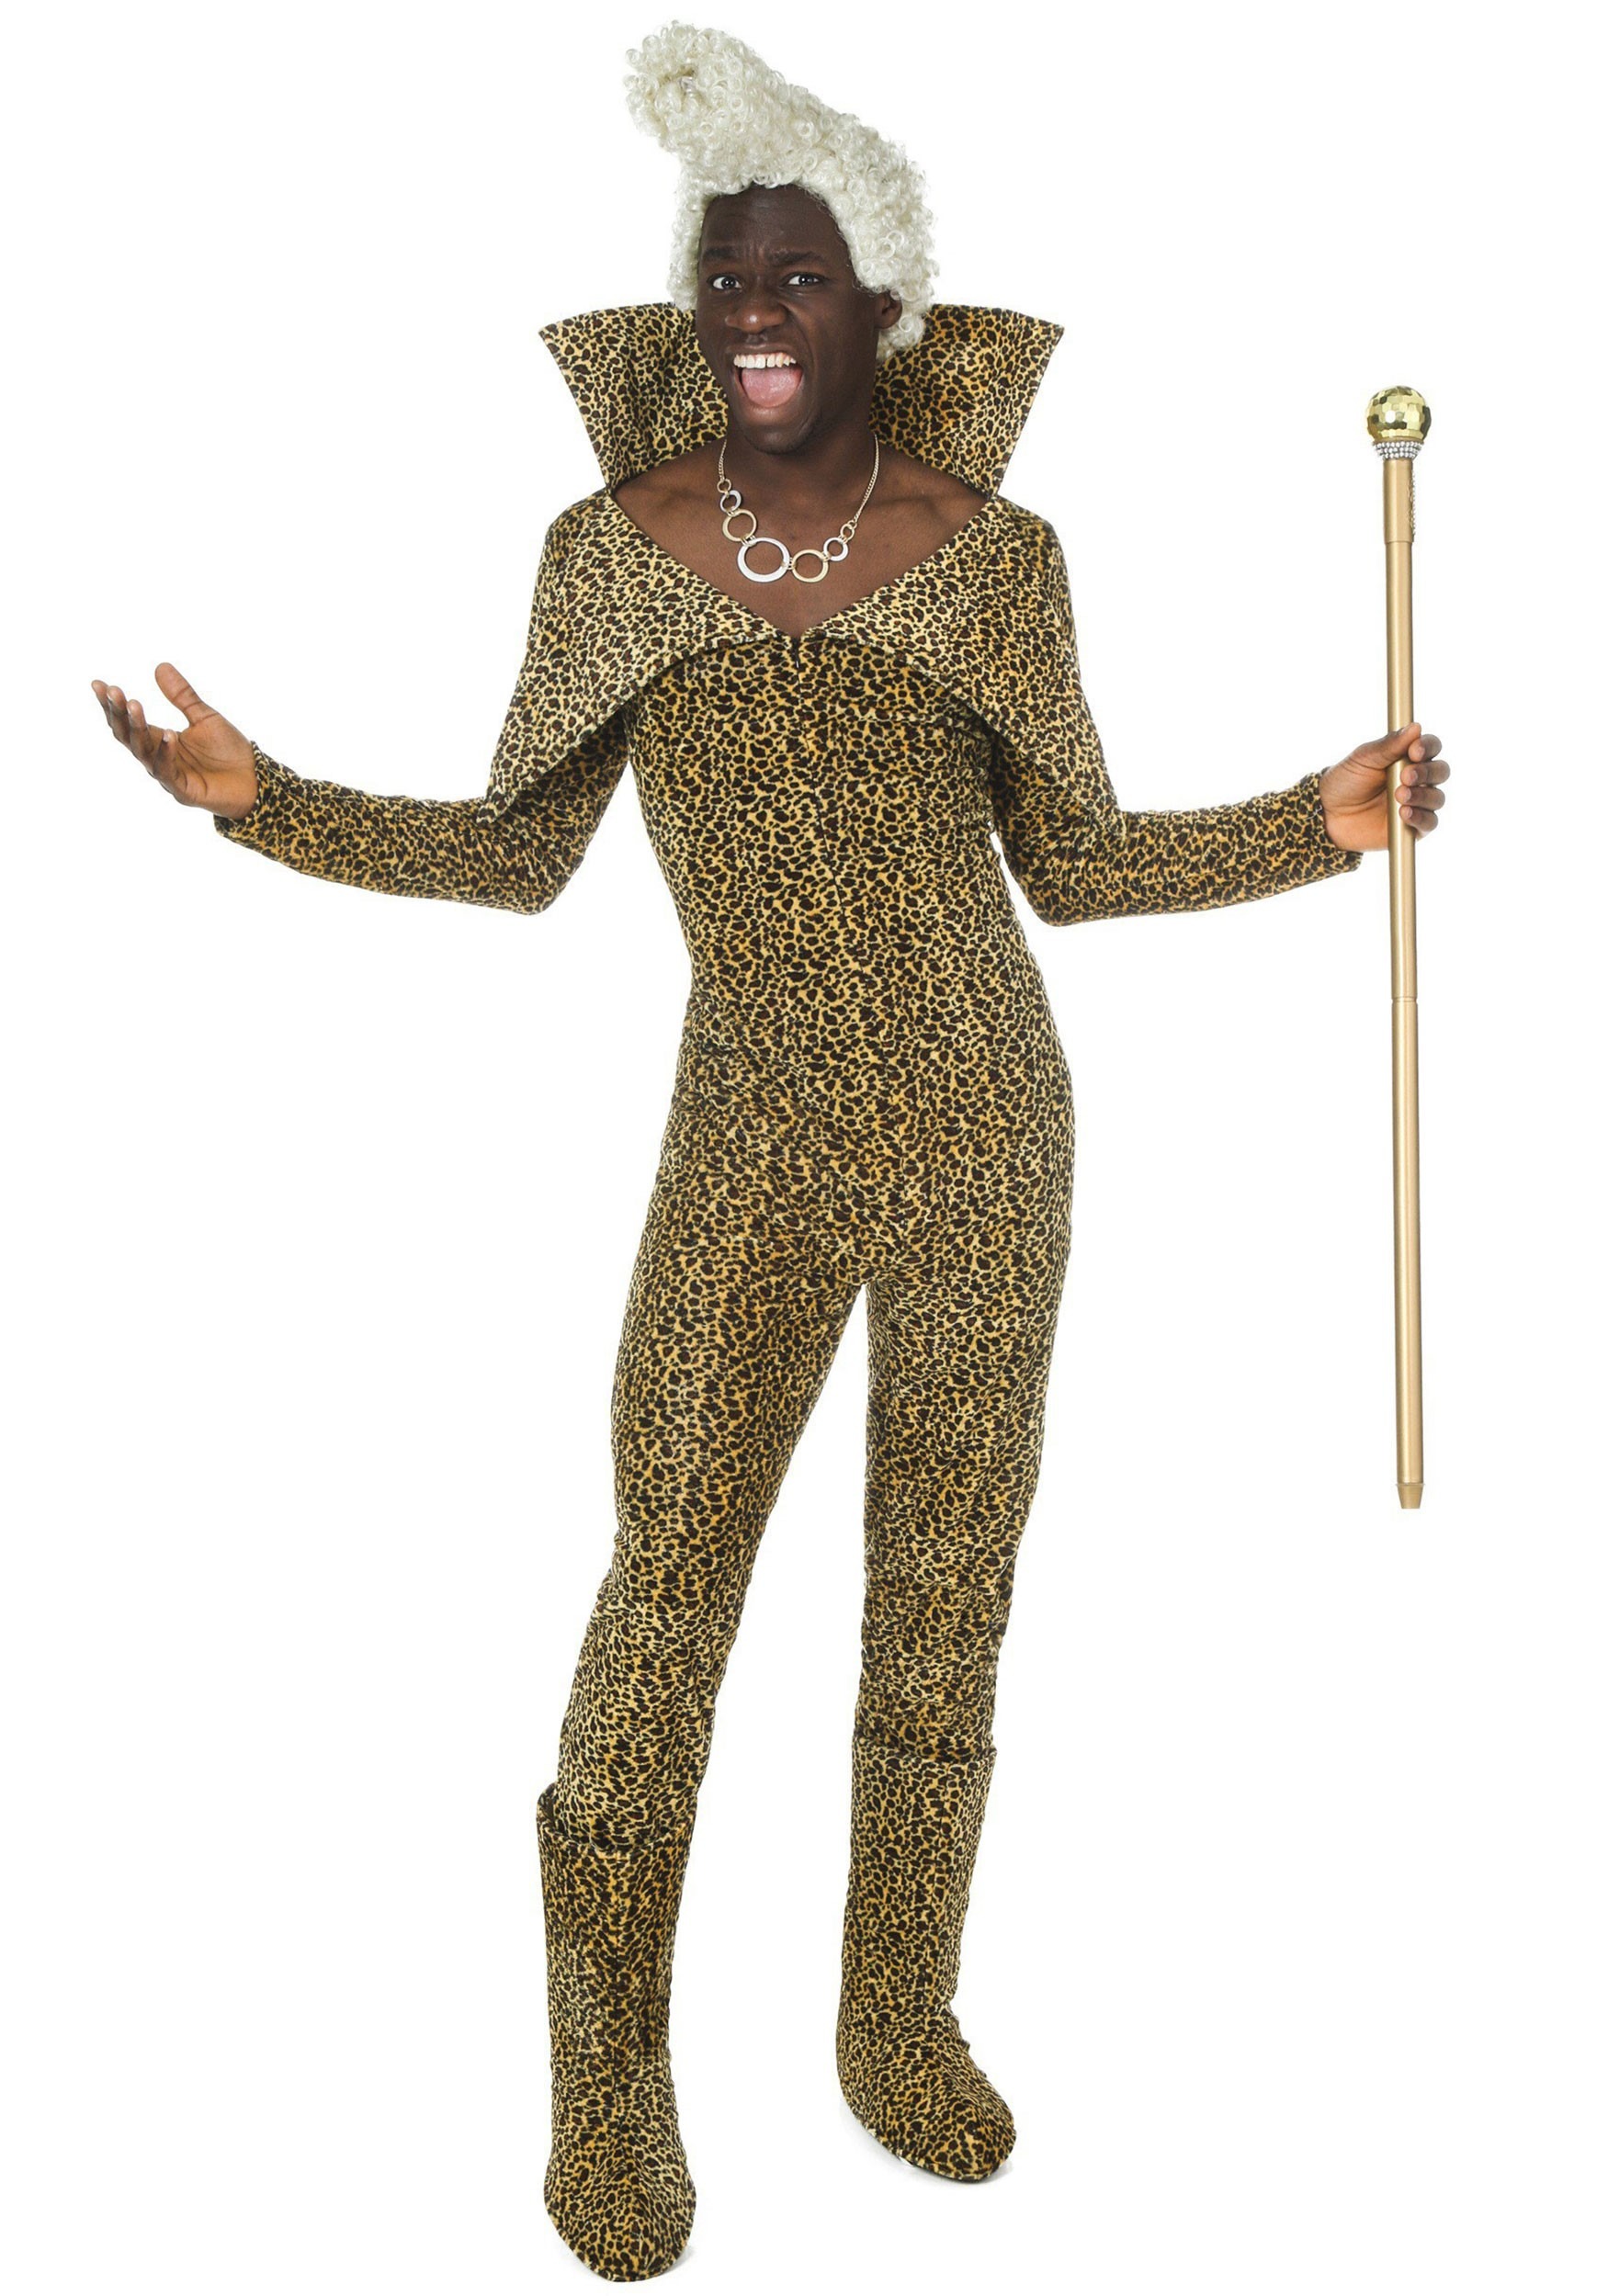 5th Element Ruby Rhod Costume for Men | Movies Costumes